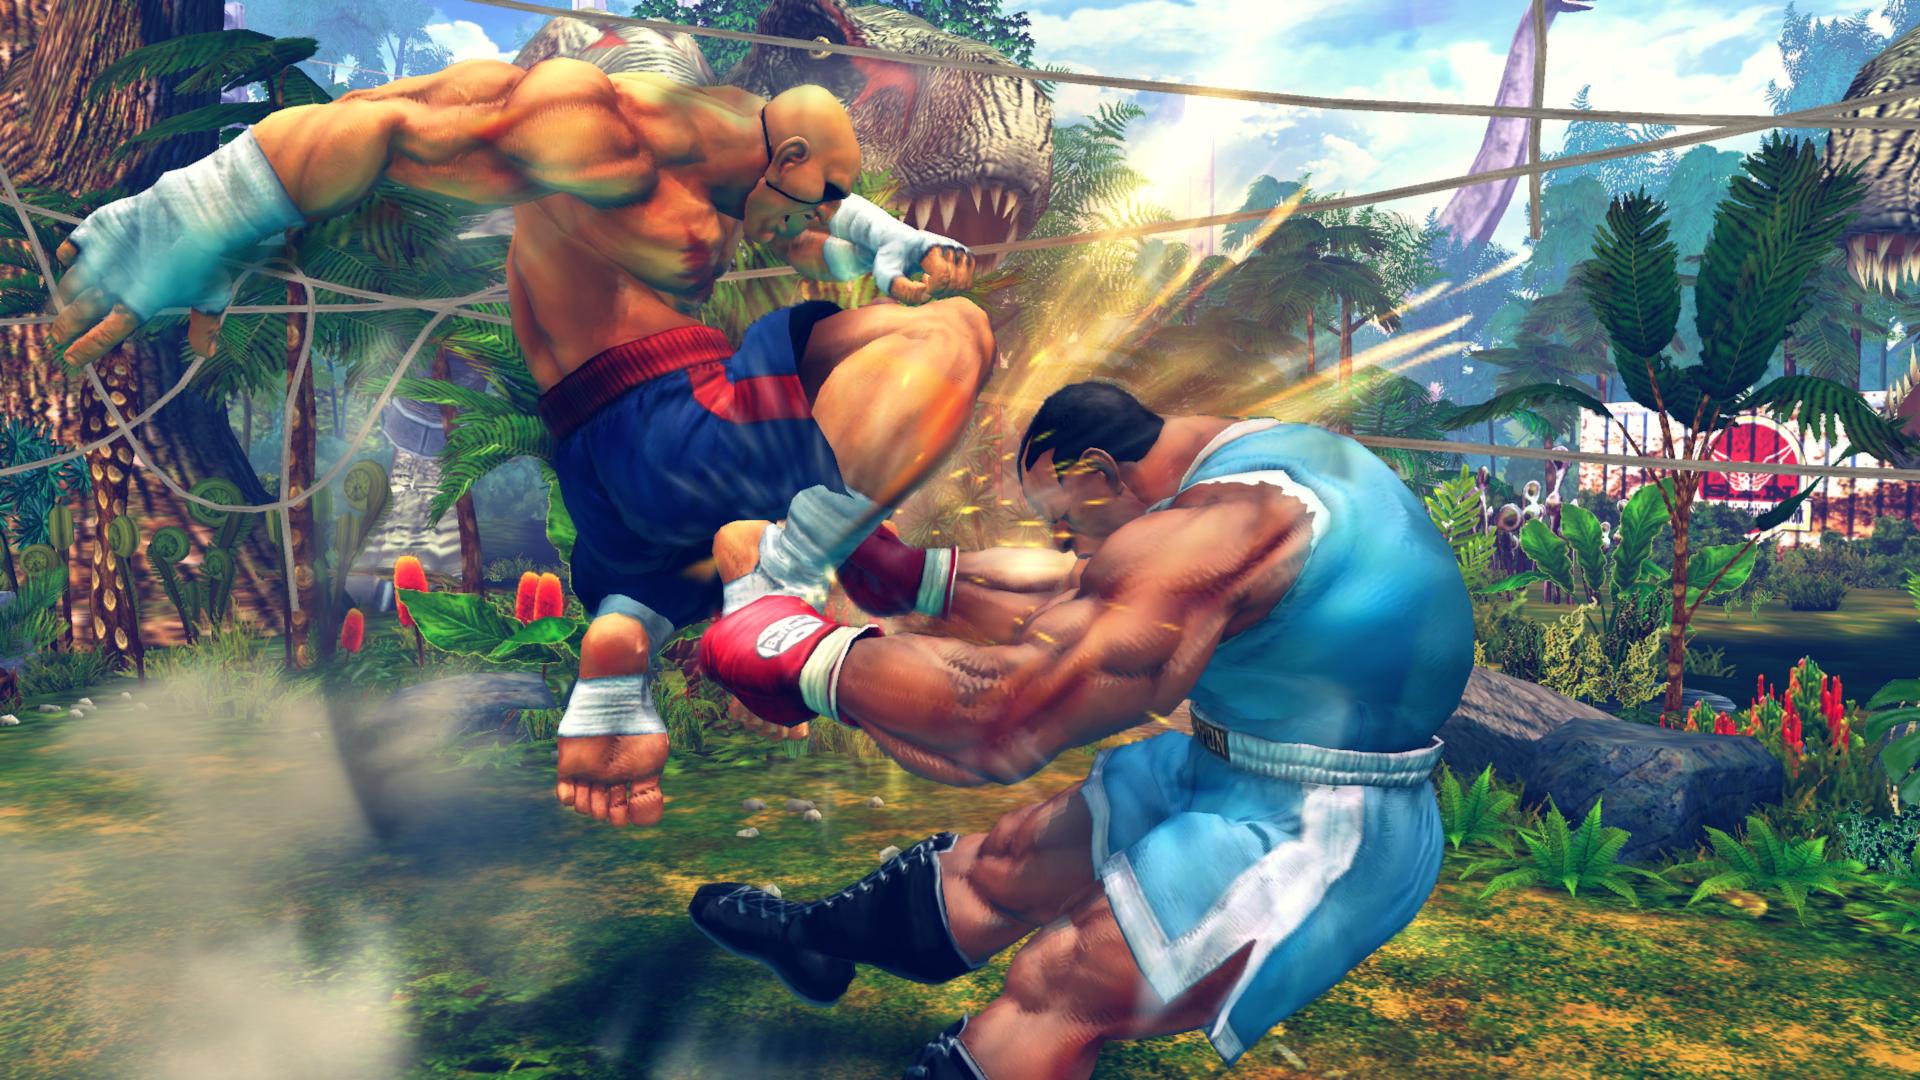 The greatest Street Fighter IV match-ups ever